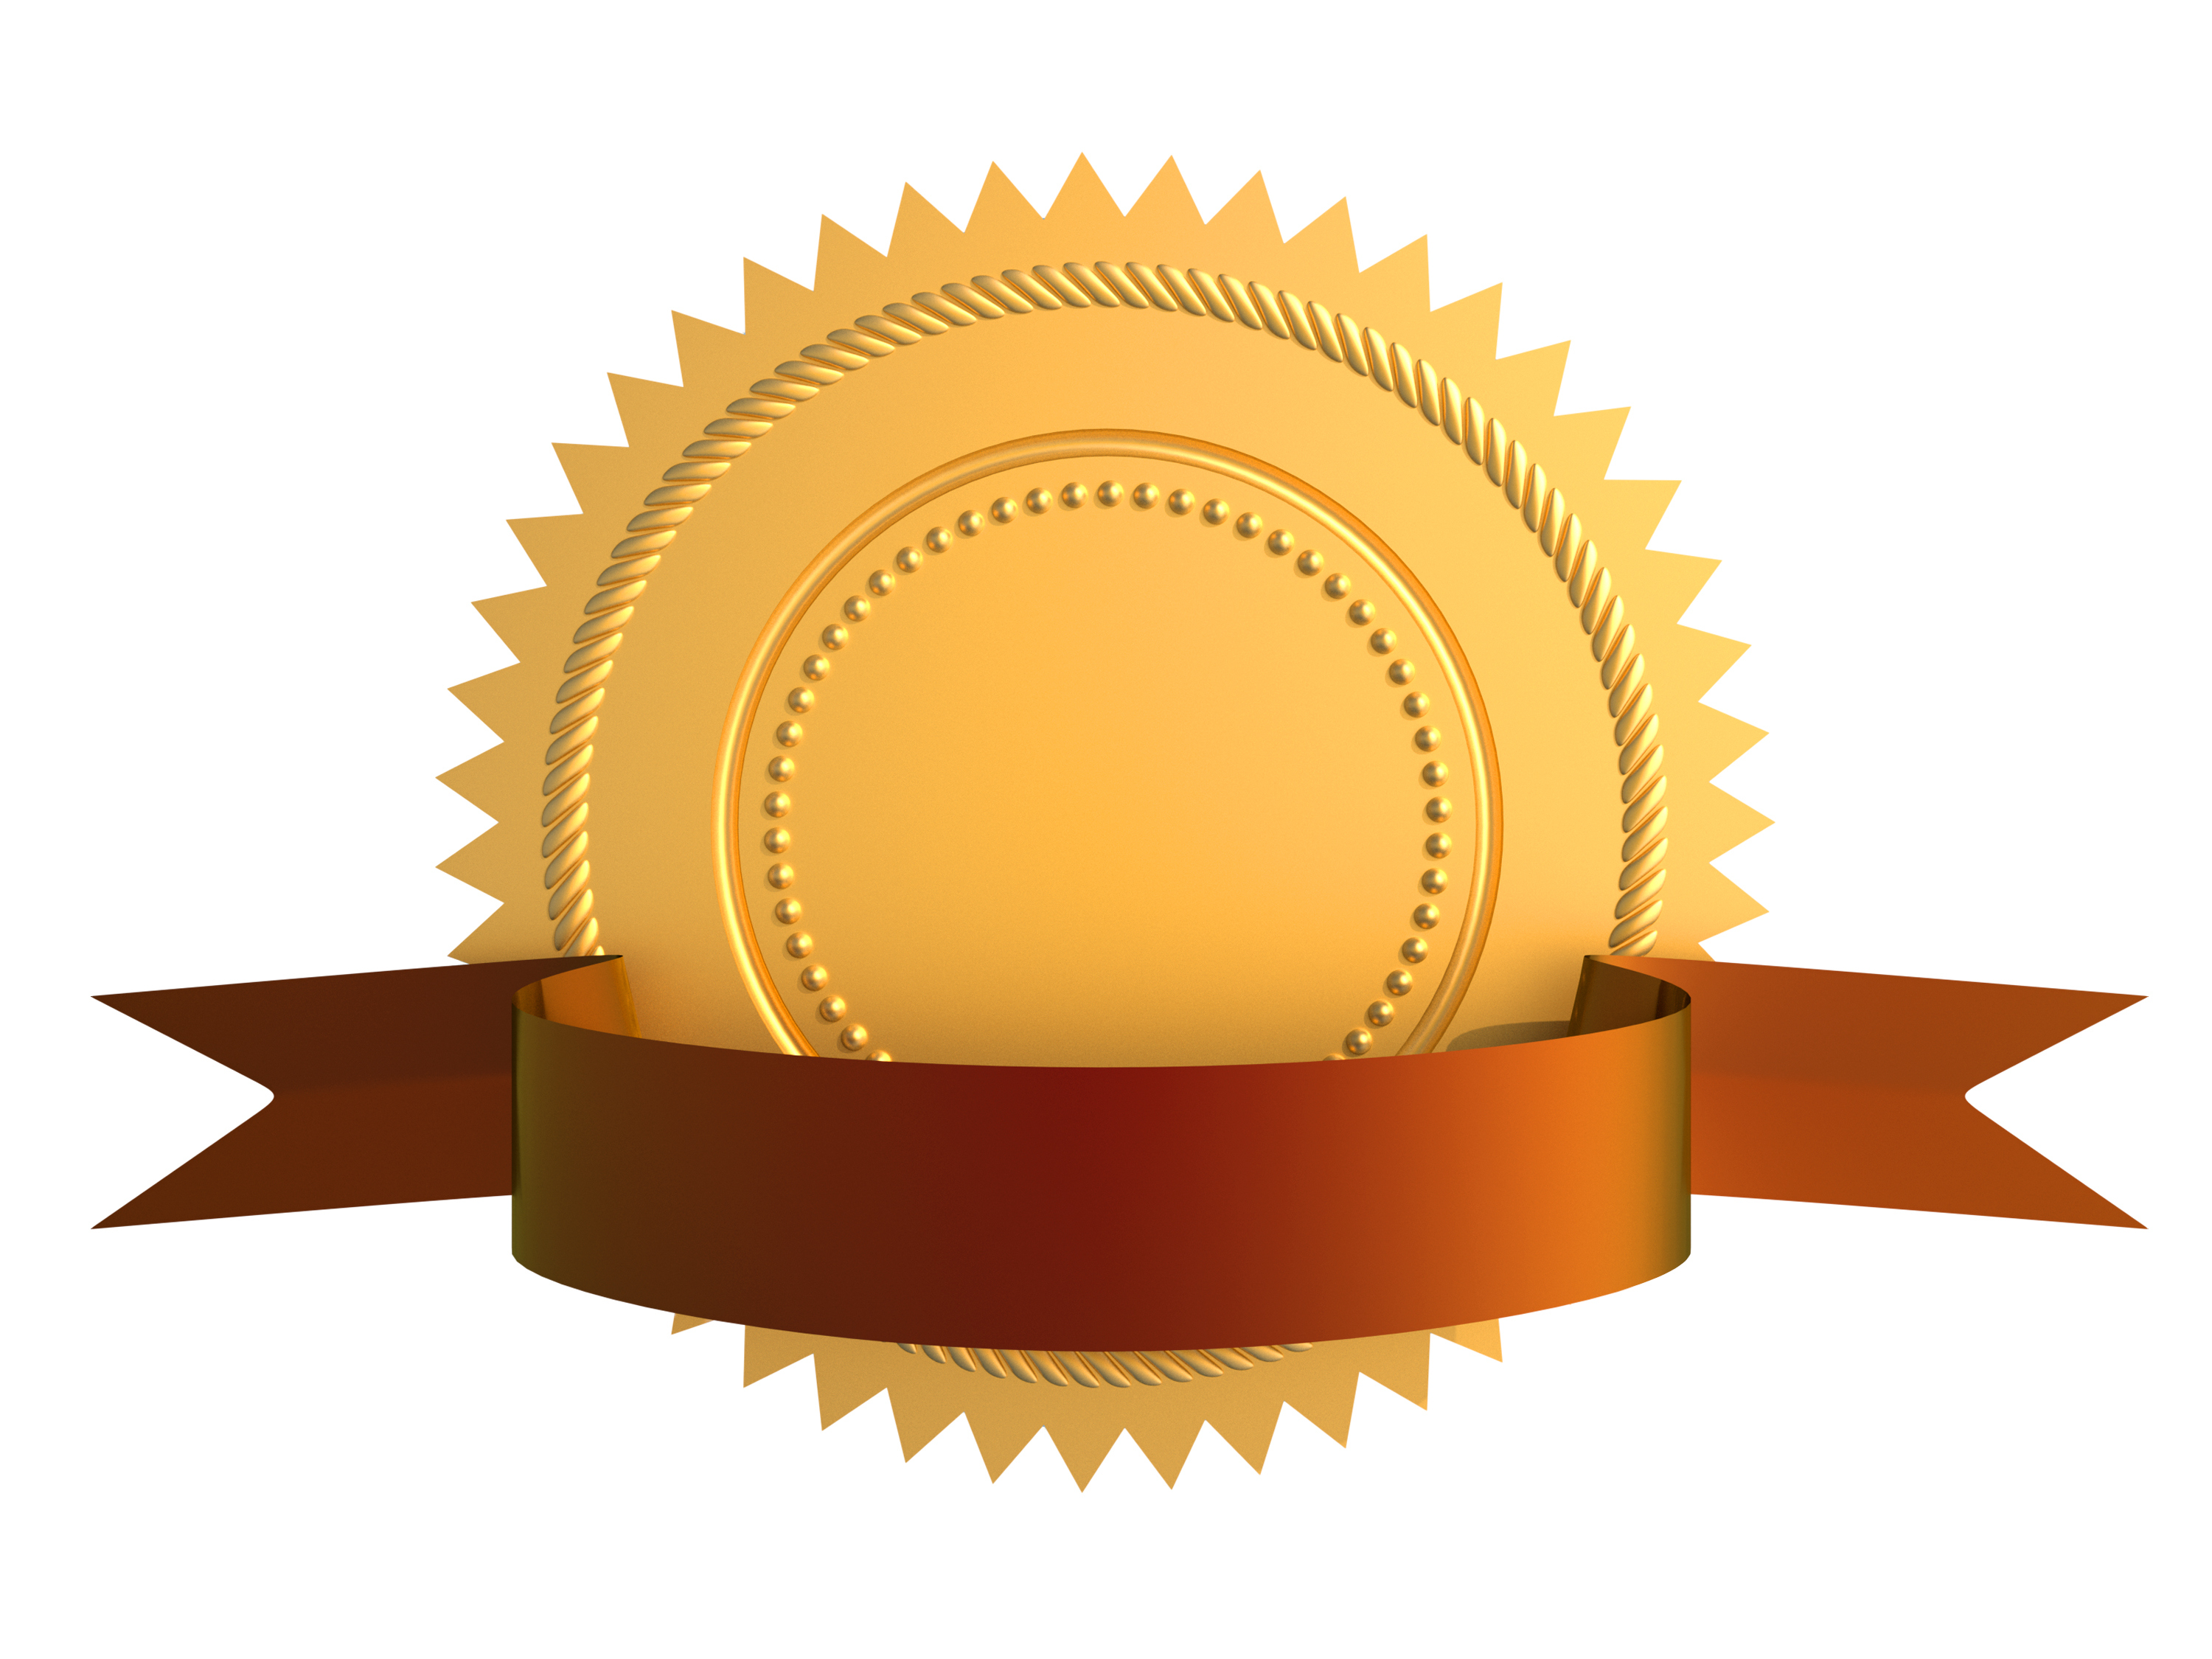 gold-seal-certificate-of-achievement-template